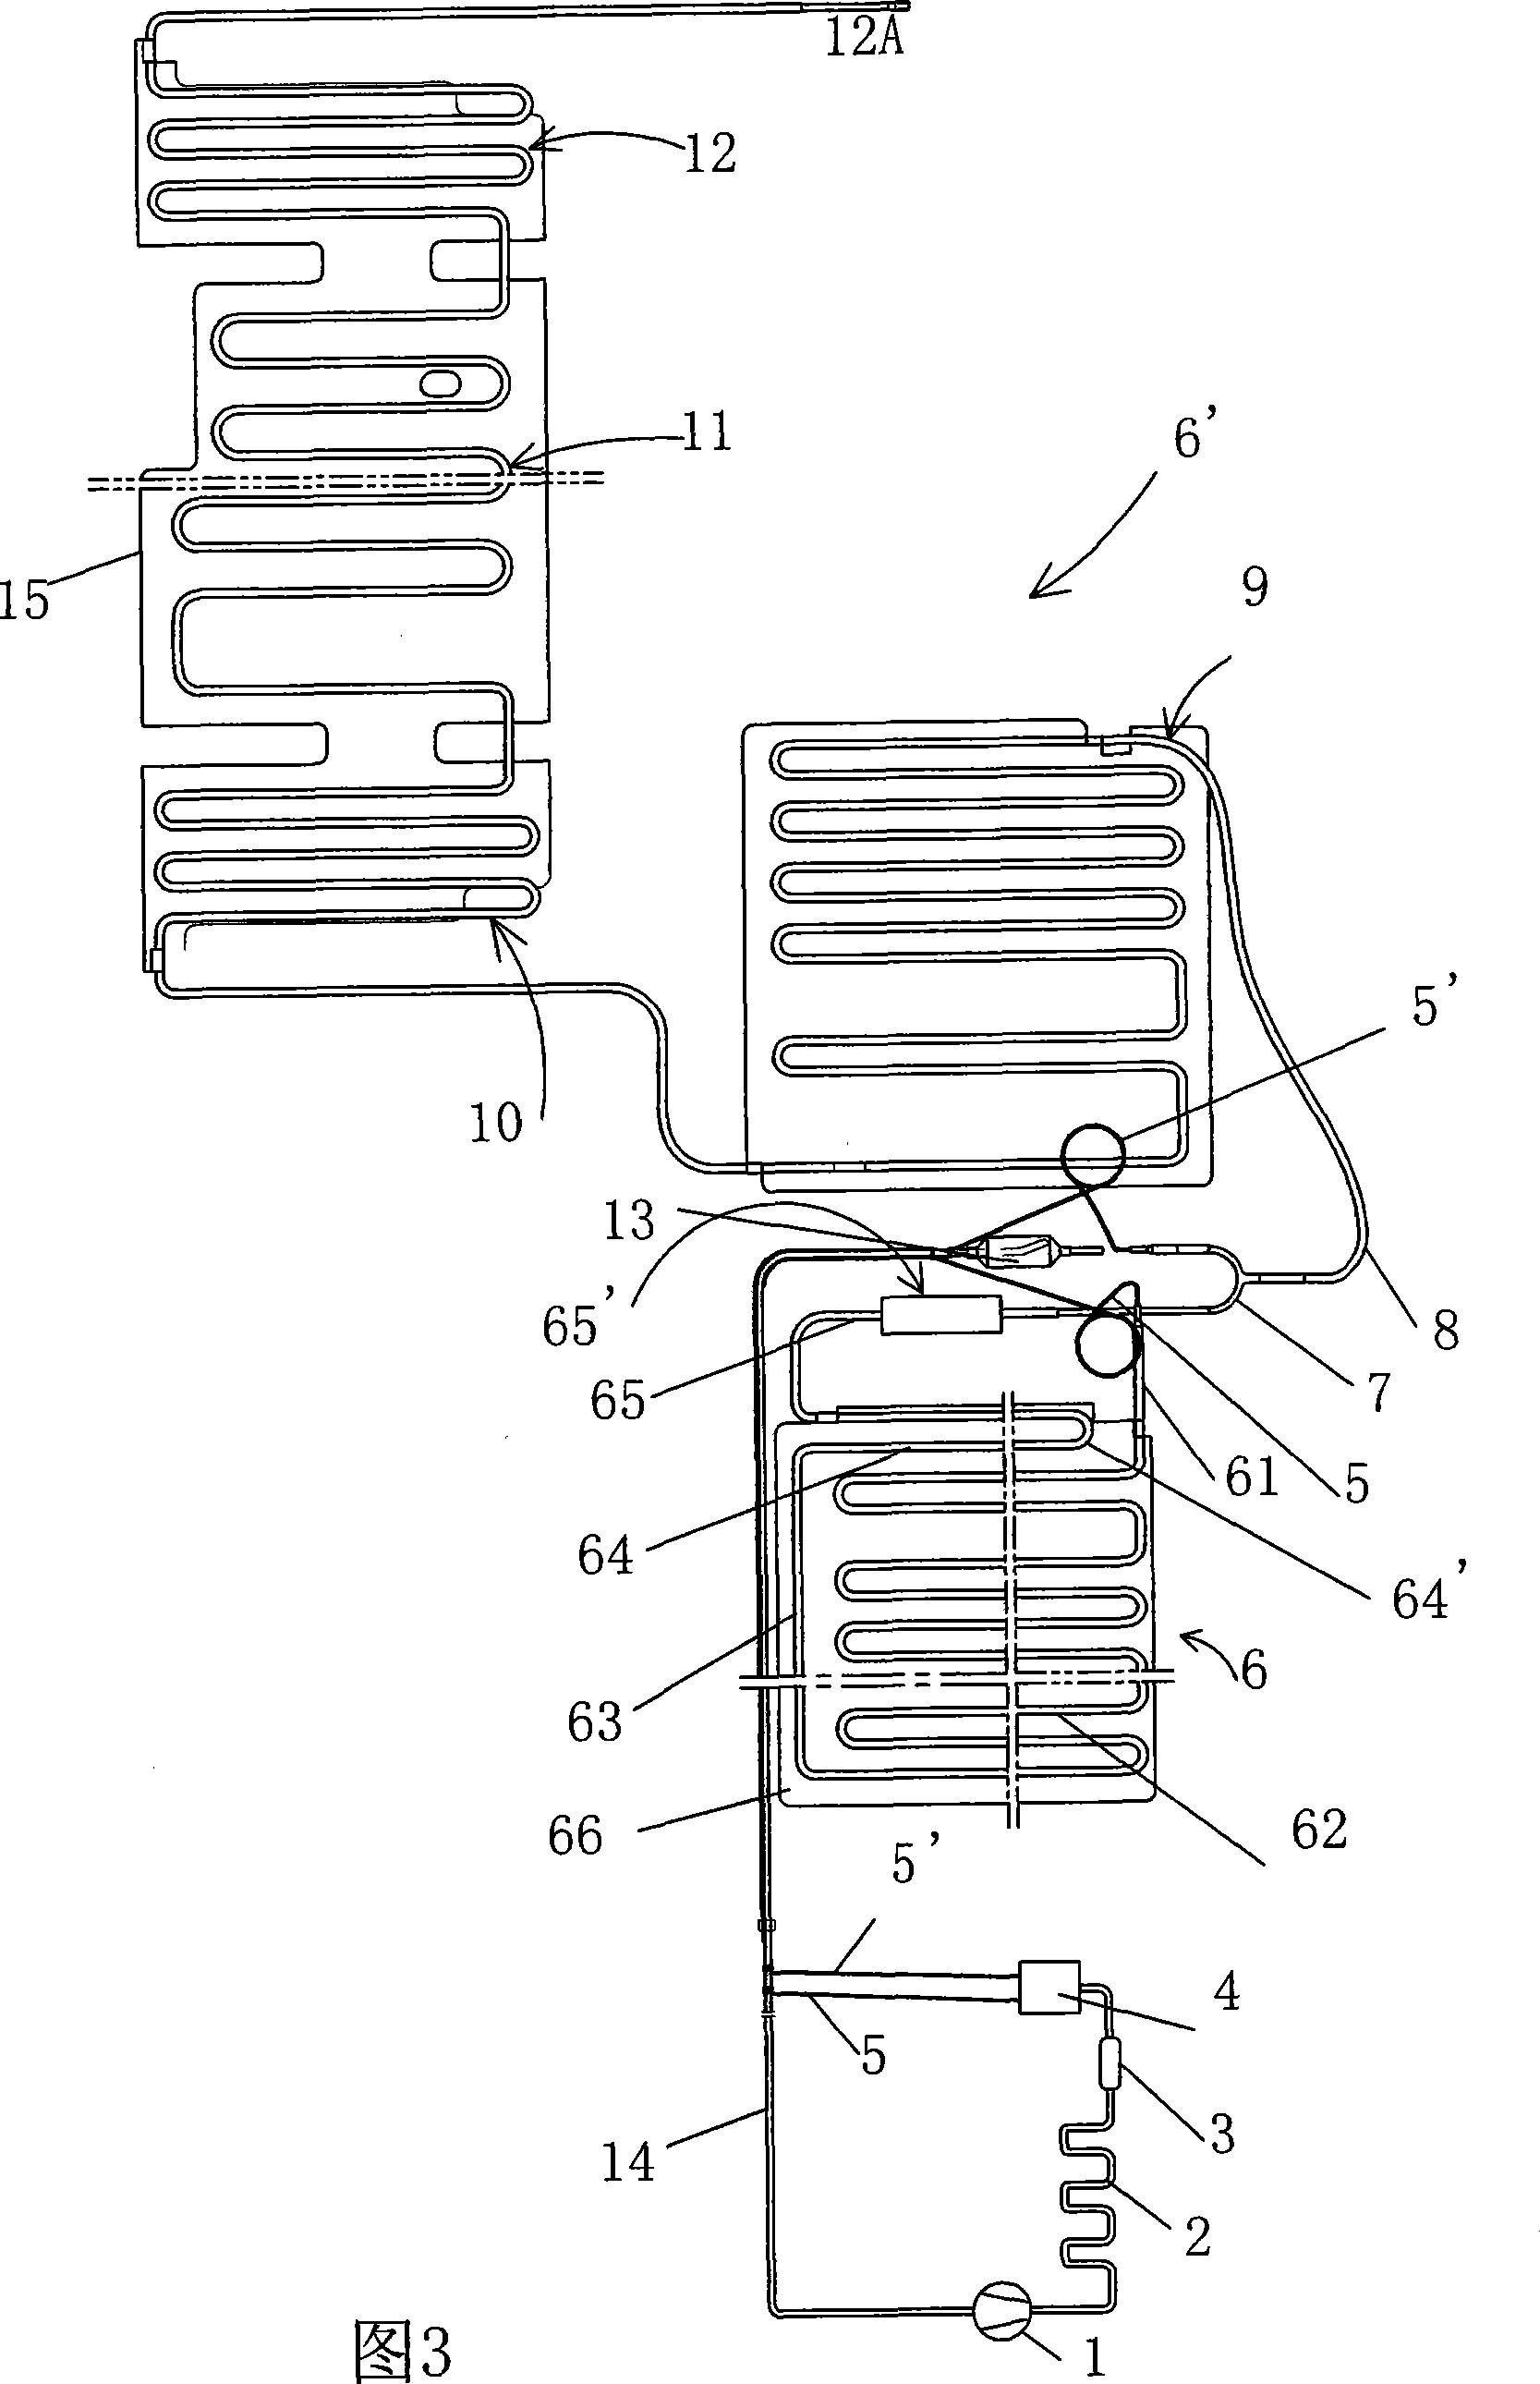 Direct freezing double-system double door refrigerator with freezing chamber at upper part